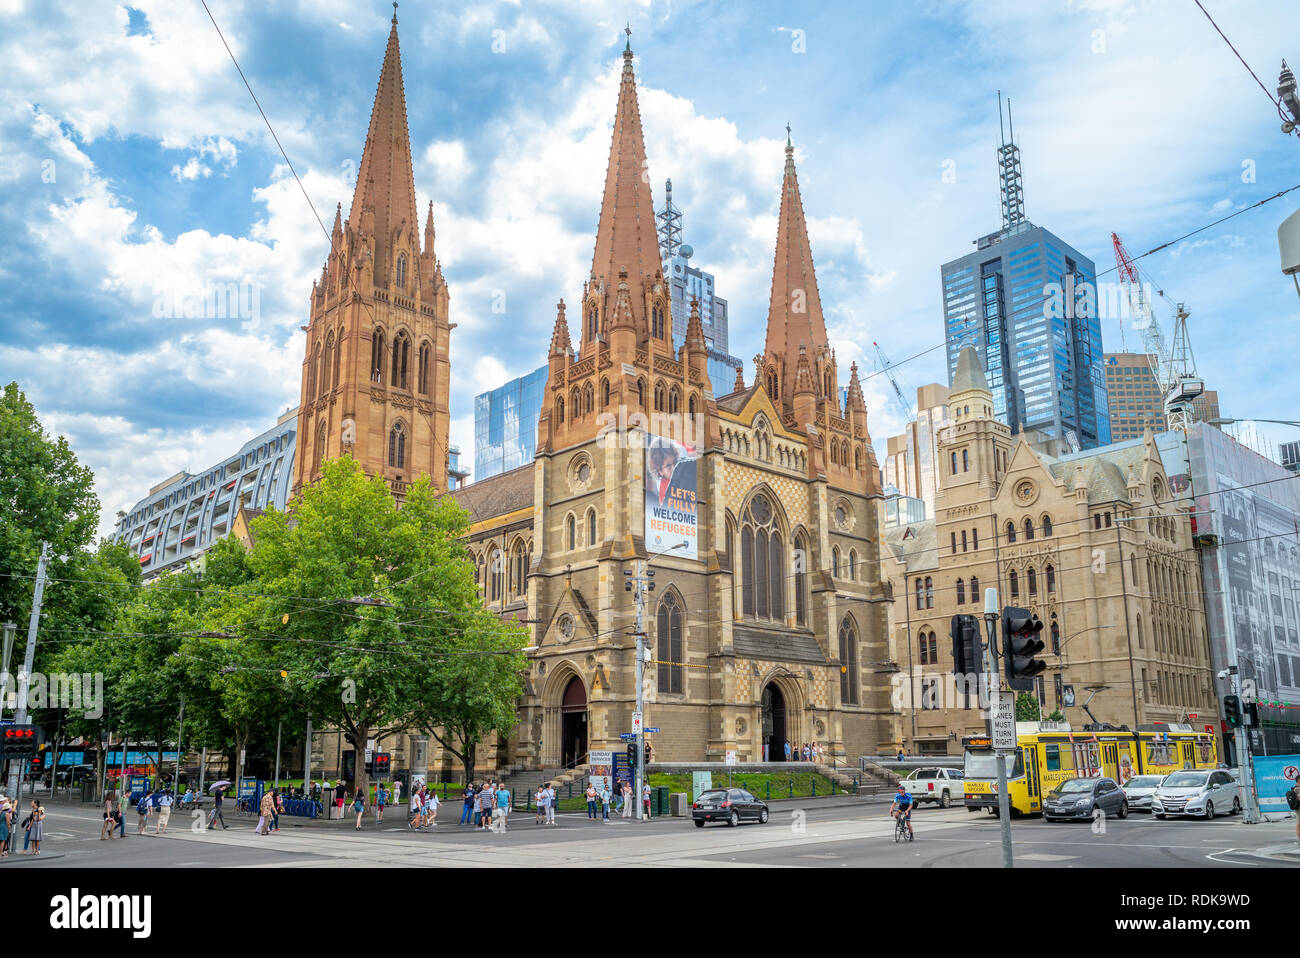 Melbourne, Australia - December 28, 2018: St Paul's Cathedral, designed by major English Gothic Revival architect William Butterfield and completed in Stock Photo